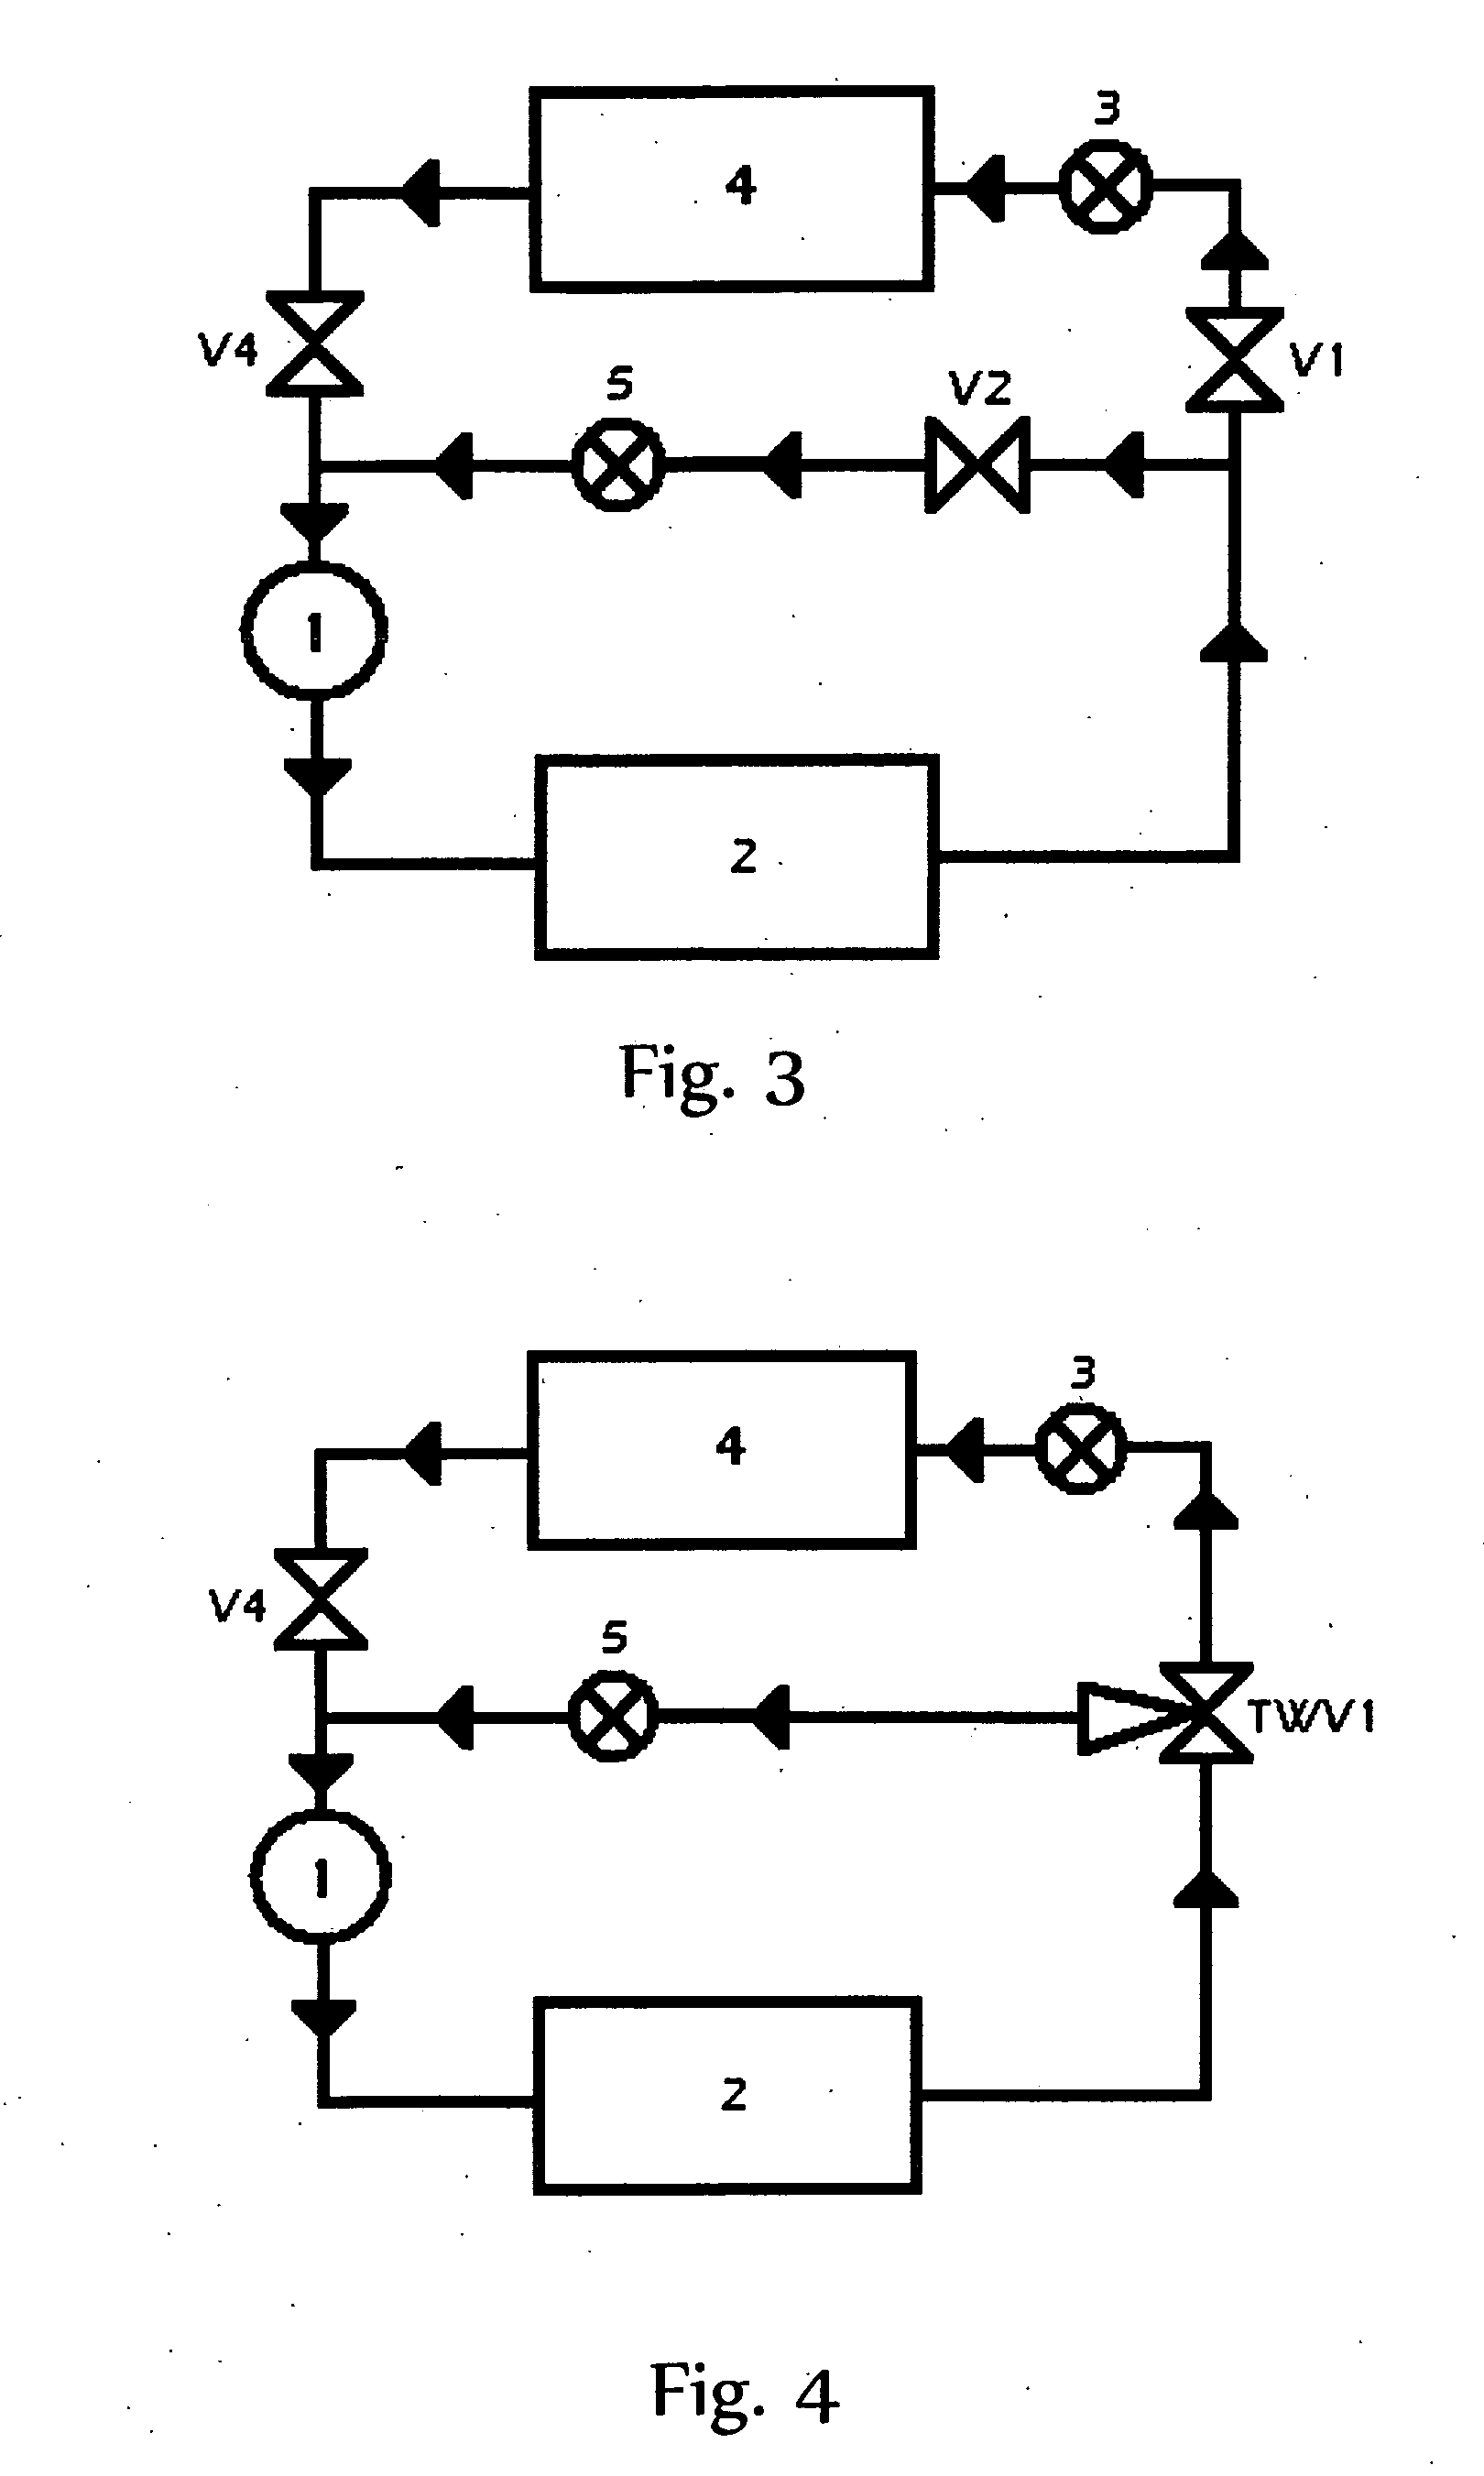 Method for efficient operation of cooling system